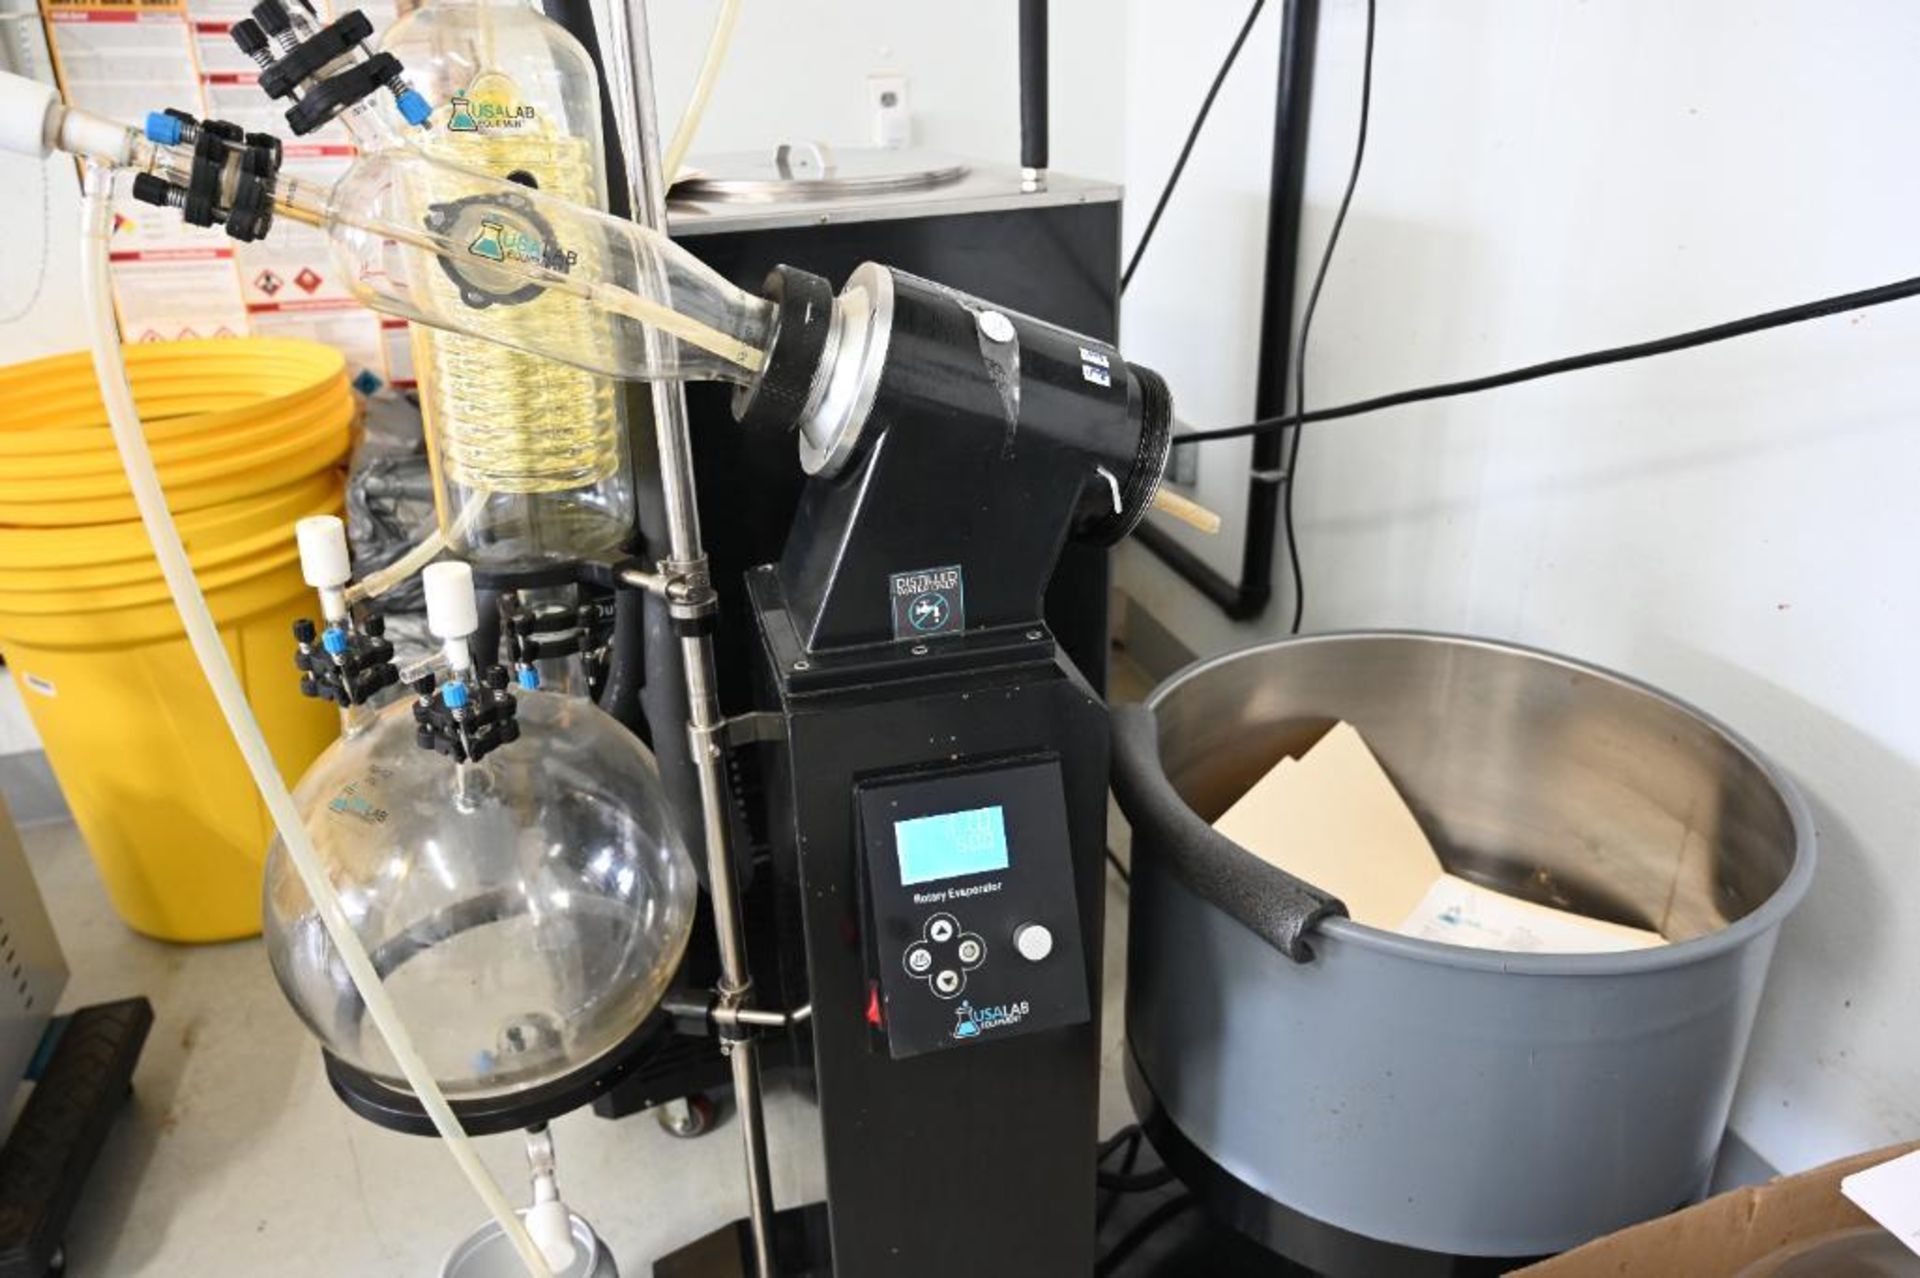 Turn Key 50 Liter USA Lab Rotary Evaporator with Chiller - Image 5 of 13